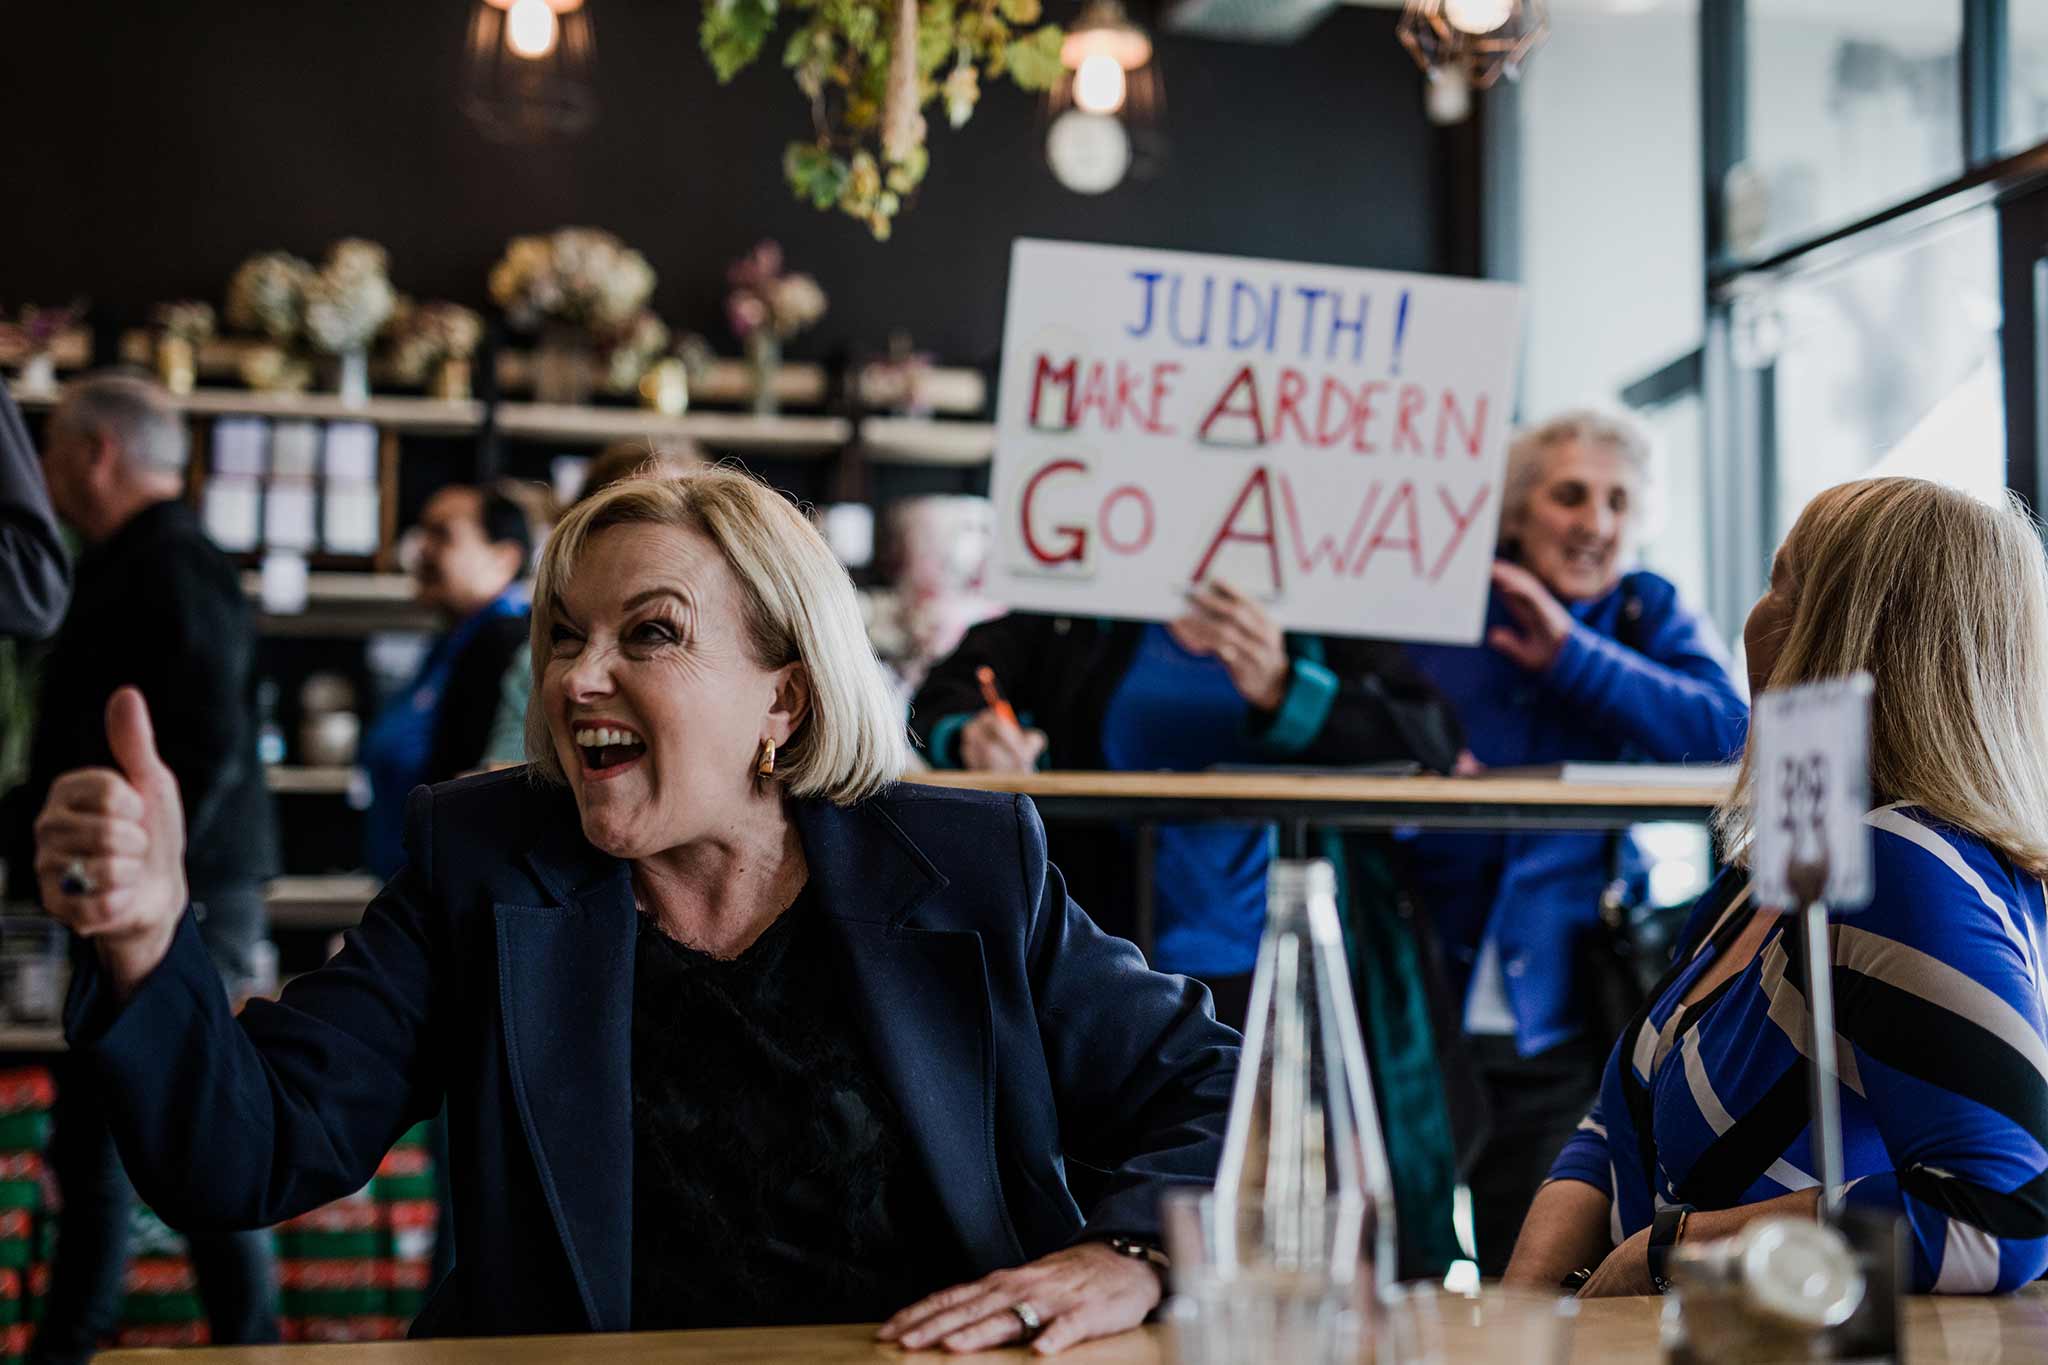 Photo of Judith Collins enthusiastically giving the thumbs up in the foreground, with someone in the background holding a sign saying "Judith! Make Ardern Go Away."